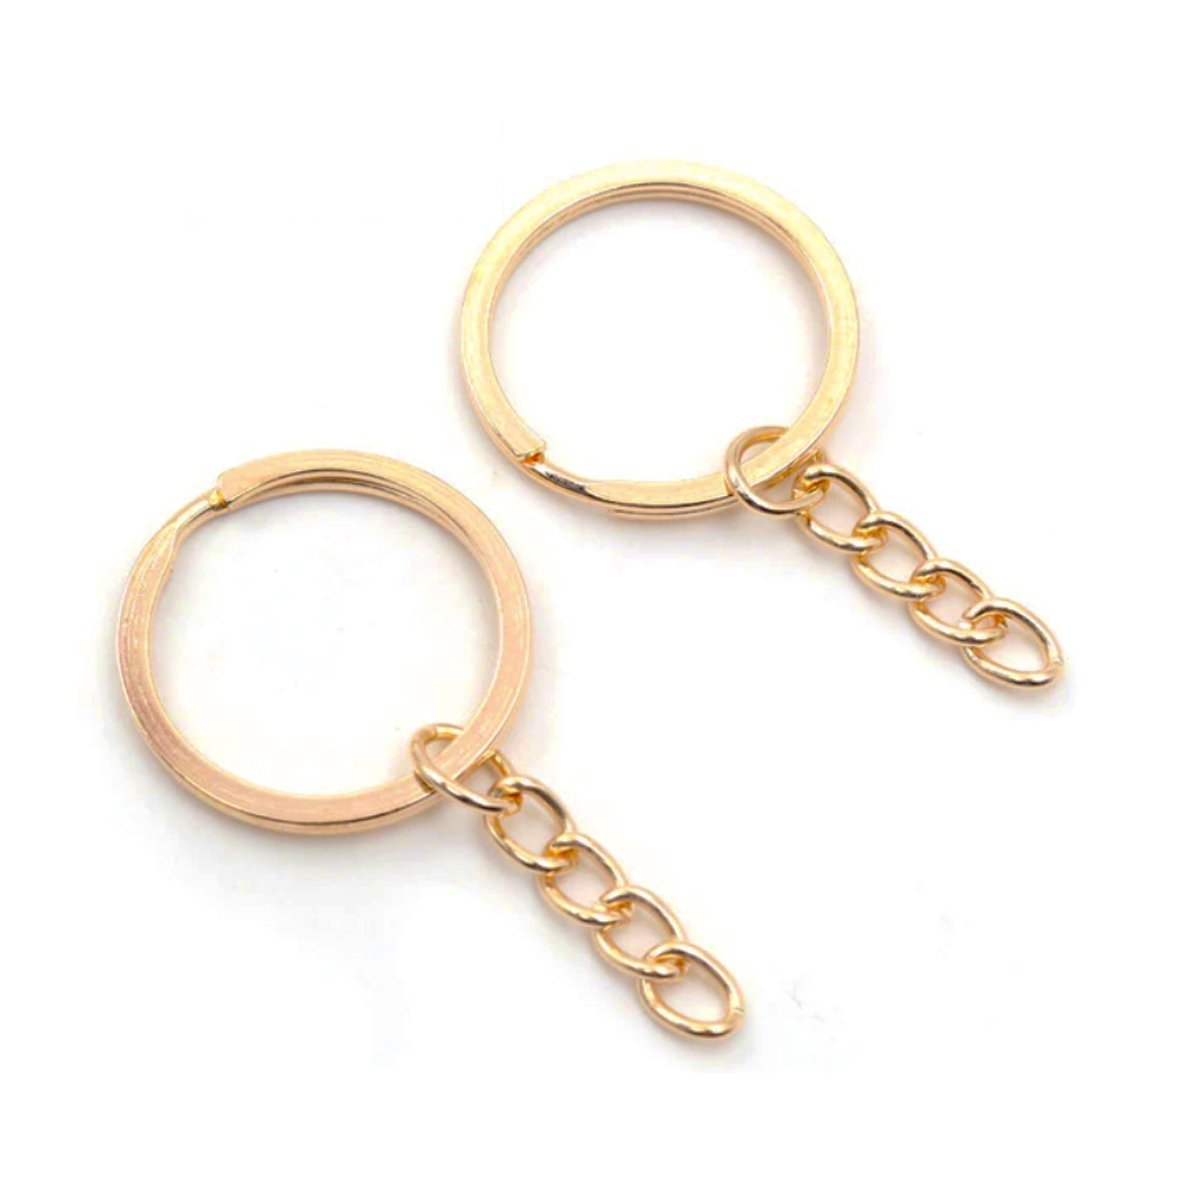 100pcs 25mm Rose Gold Ancient Keyring Keychain Split Ring Chain Key Rings Key Chains - KC Gold - - Asia Sell